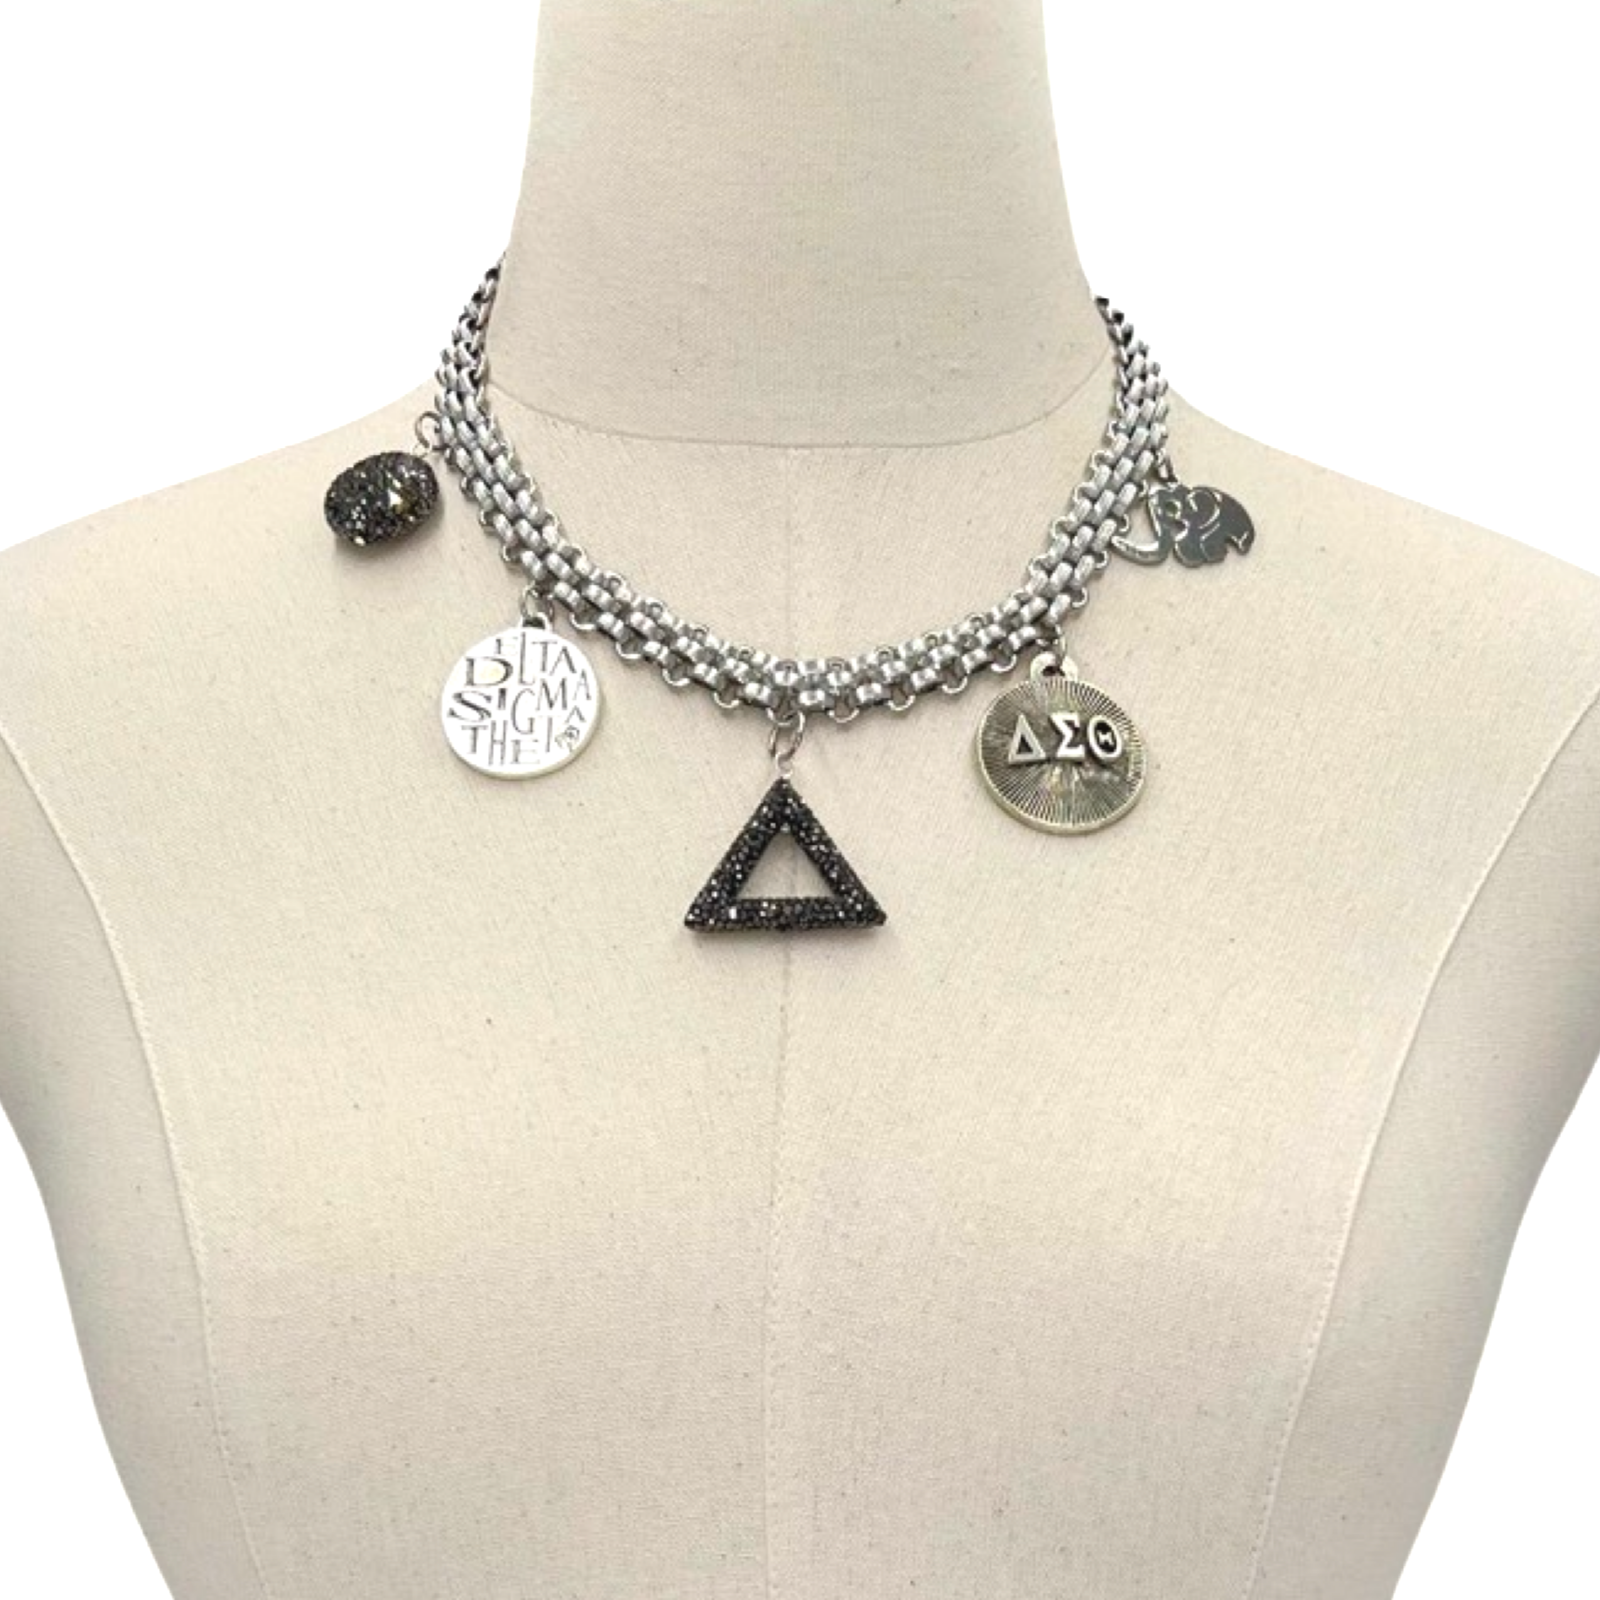 Delta Strong Necklace